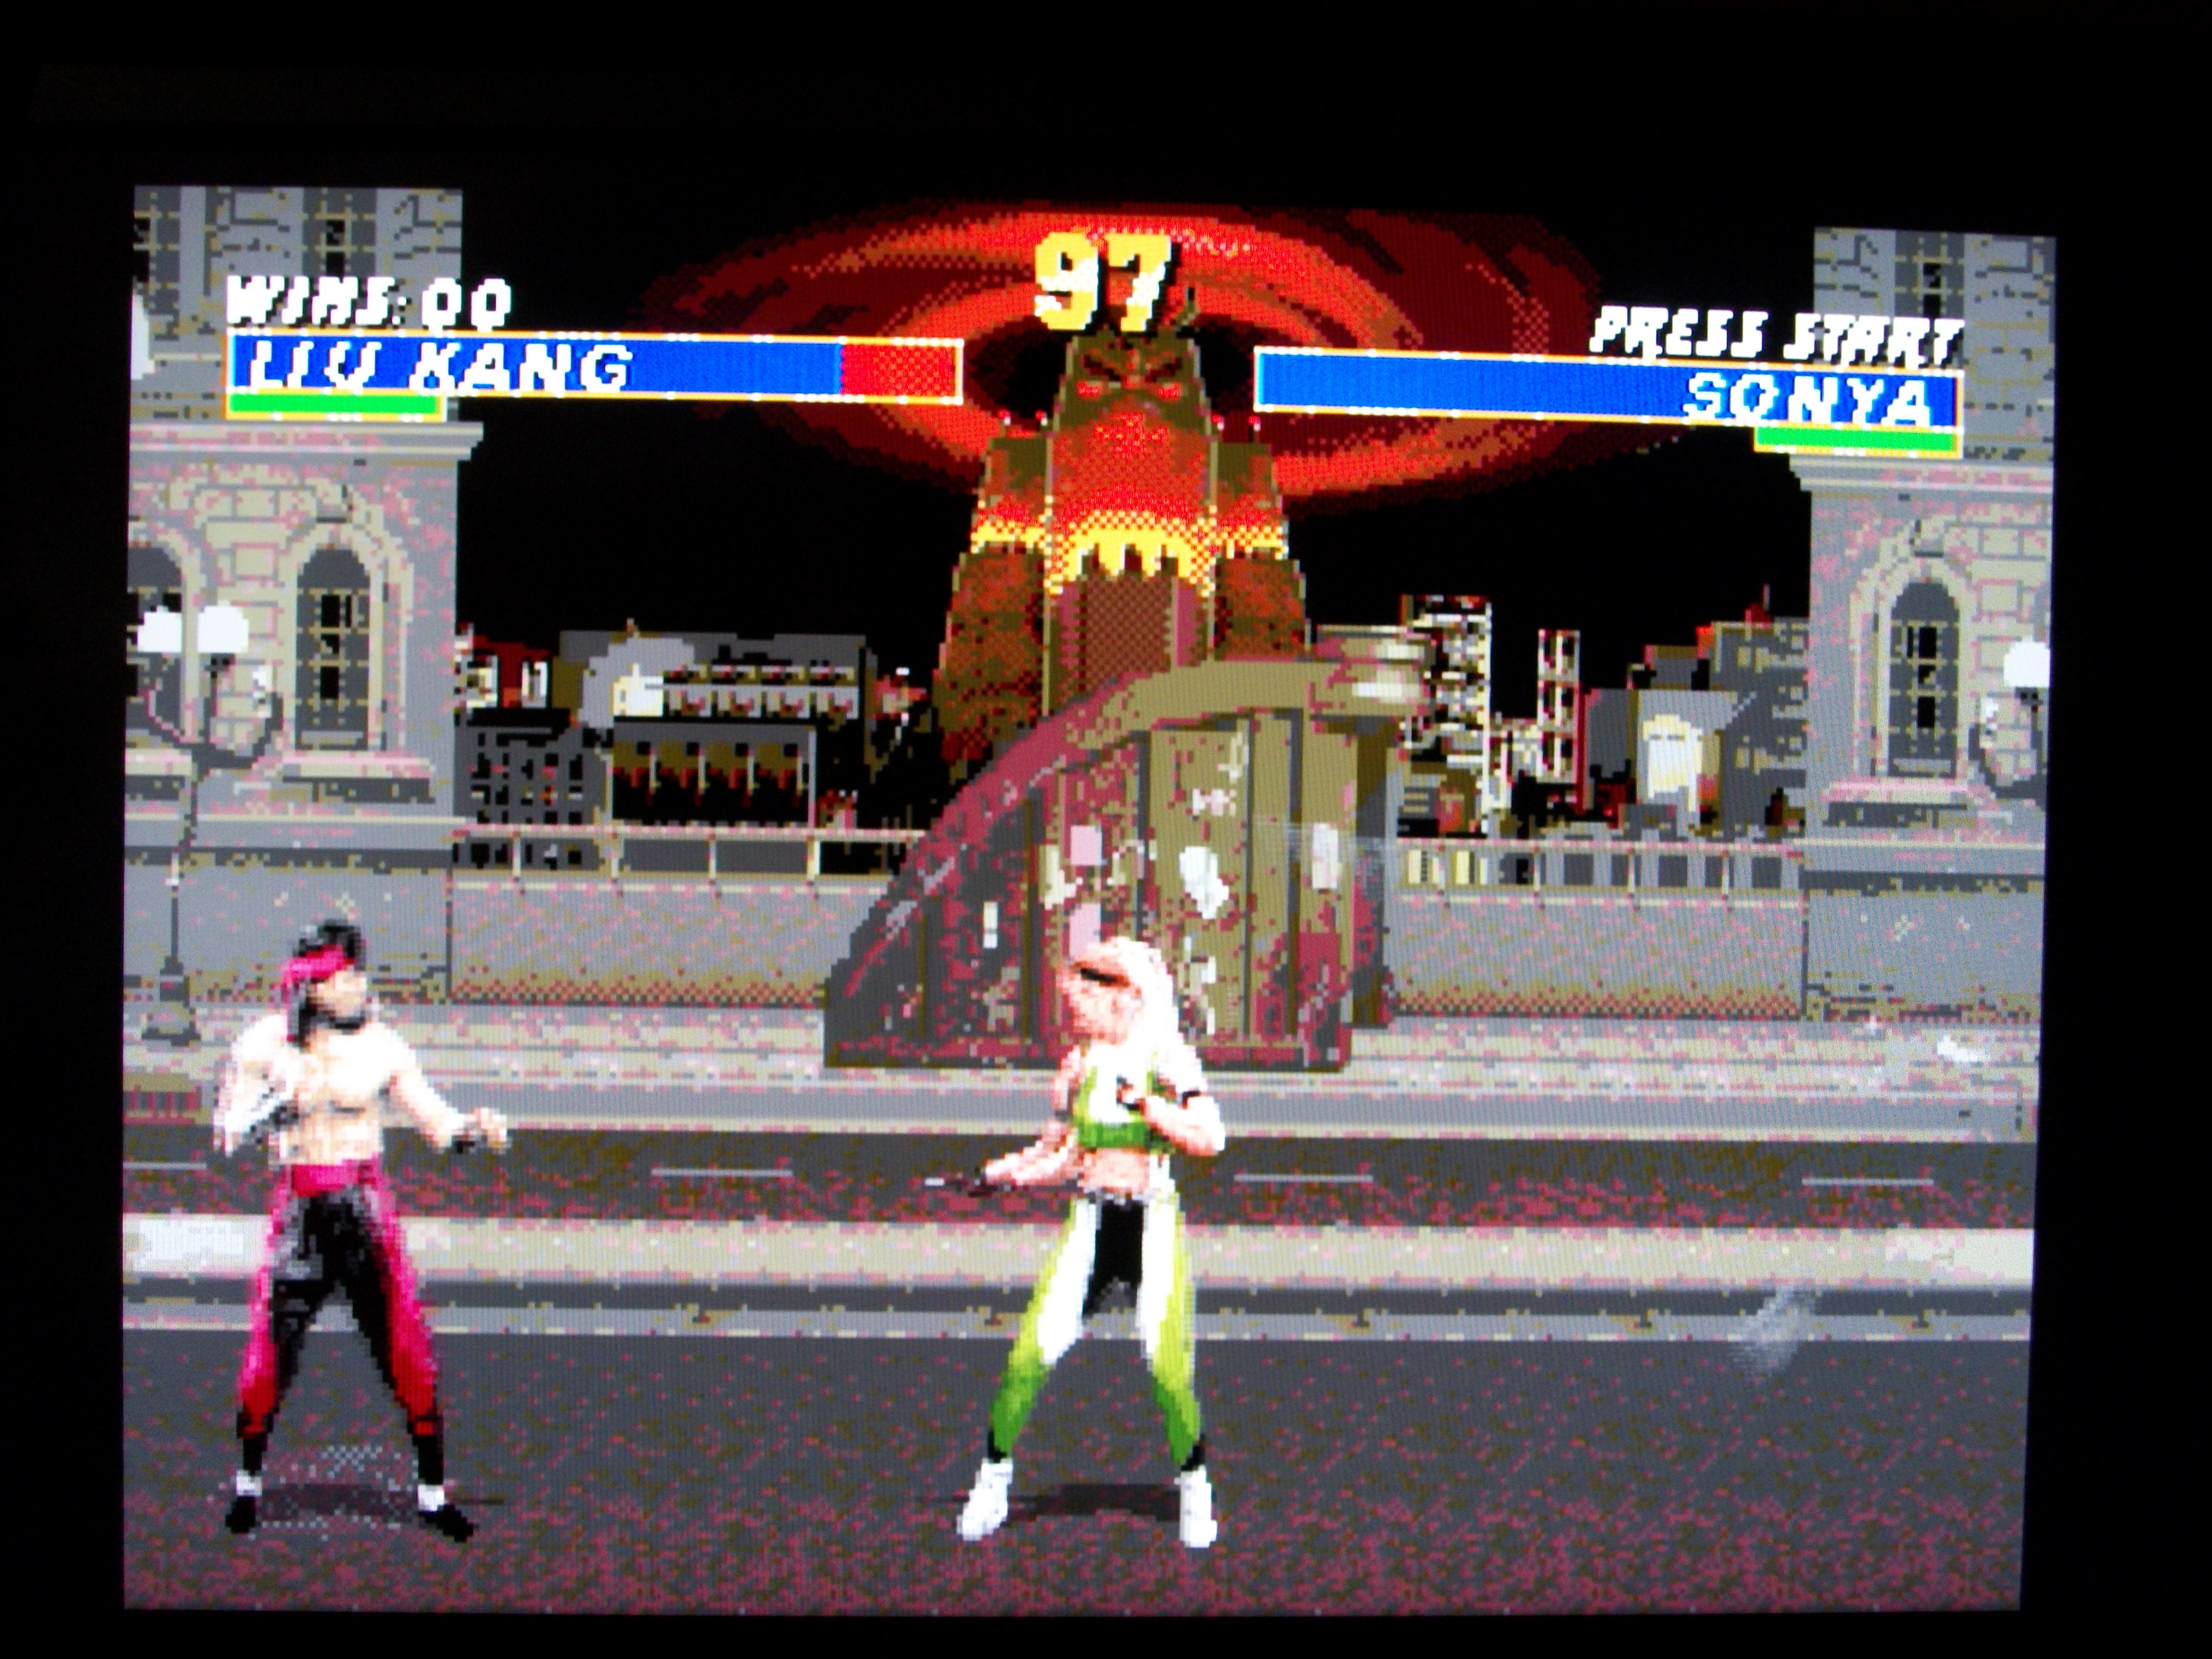 RGB Scart to HDMI upscaled to 720p screen capture